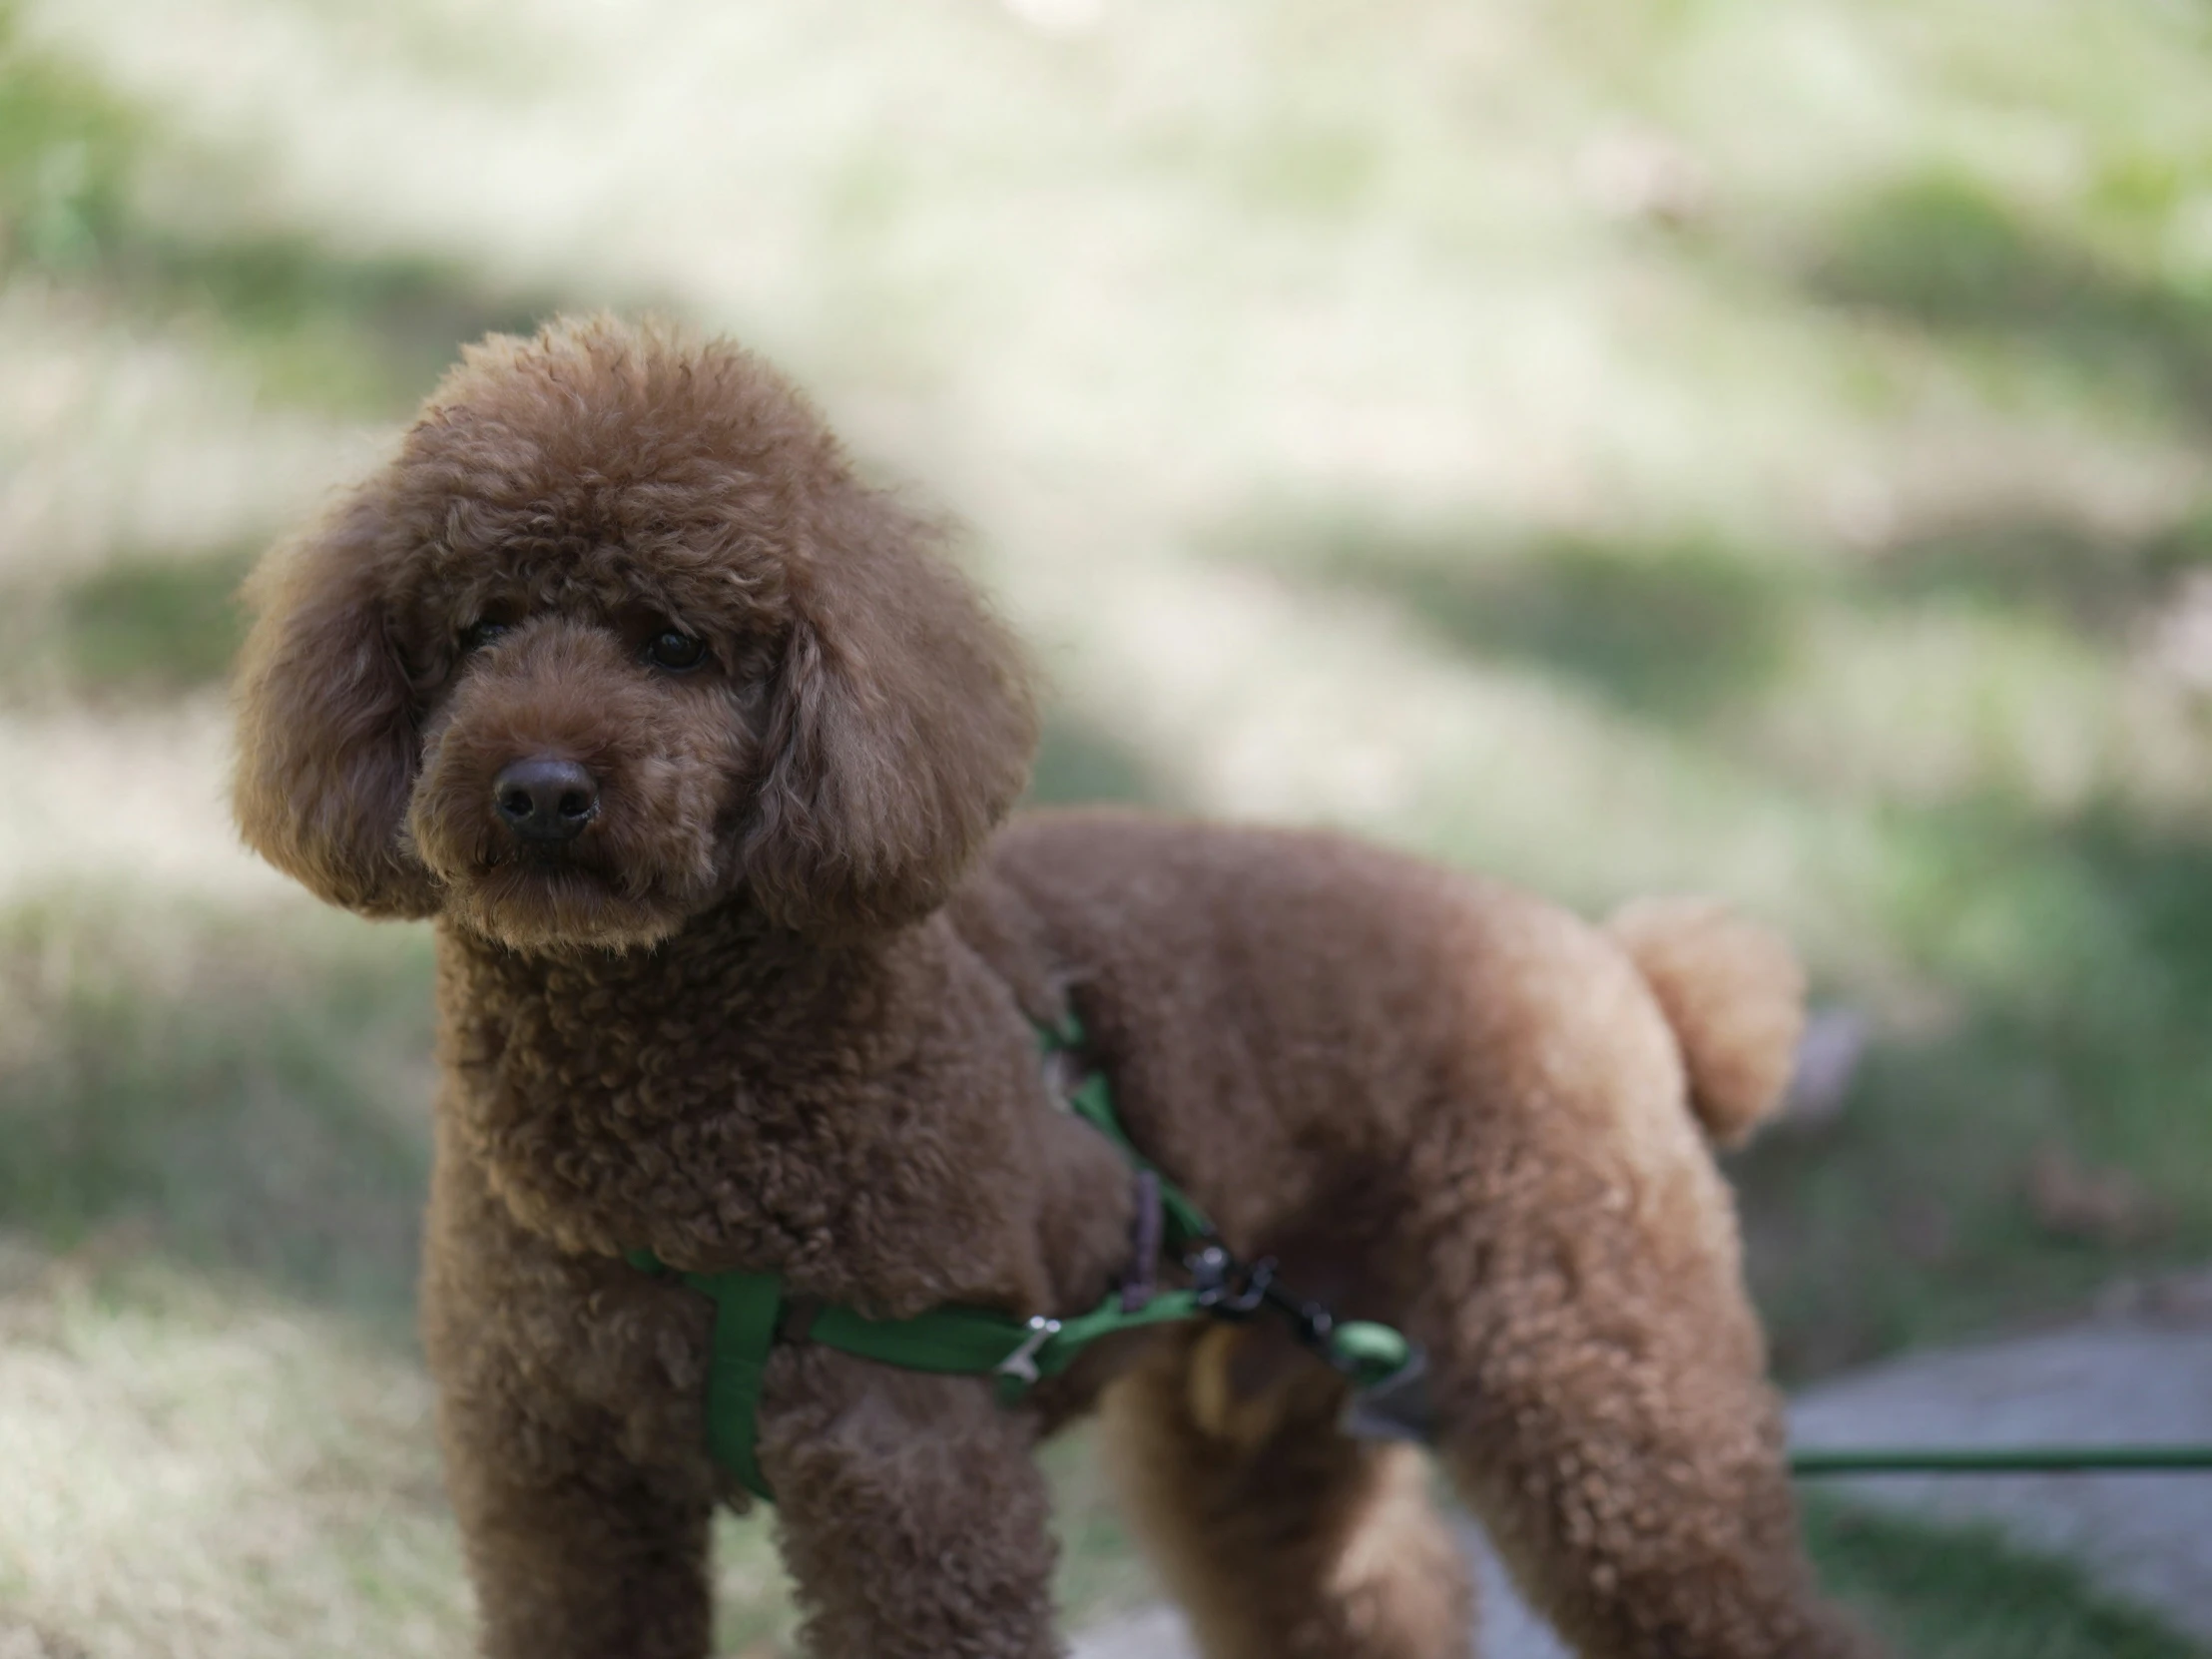 a brown dog with a green leash on its neck